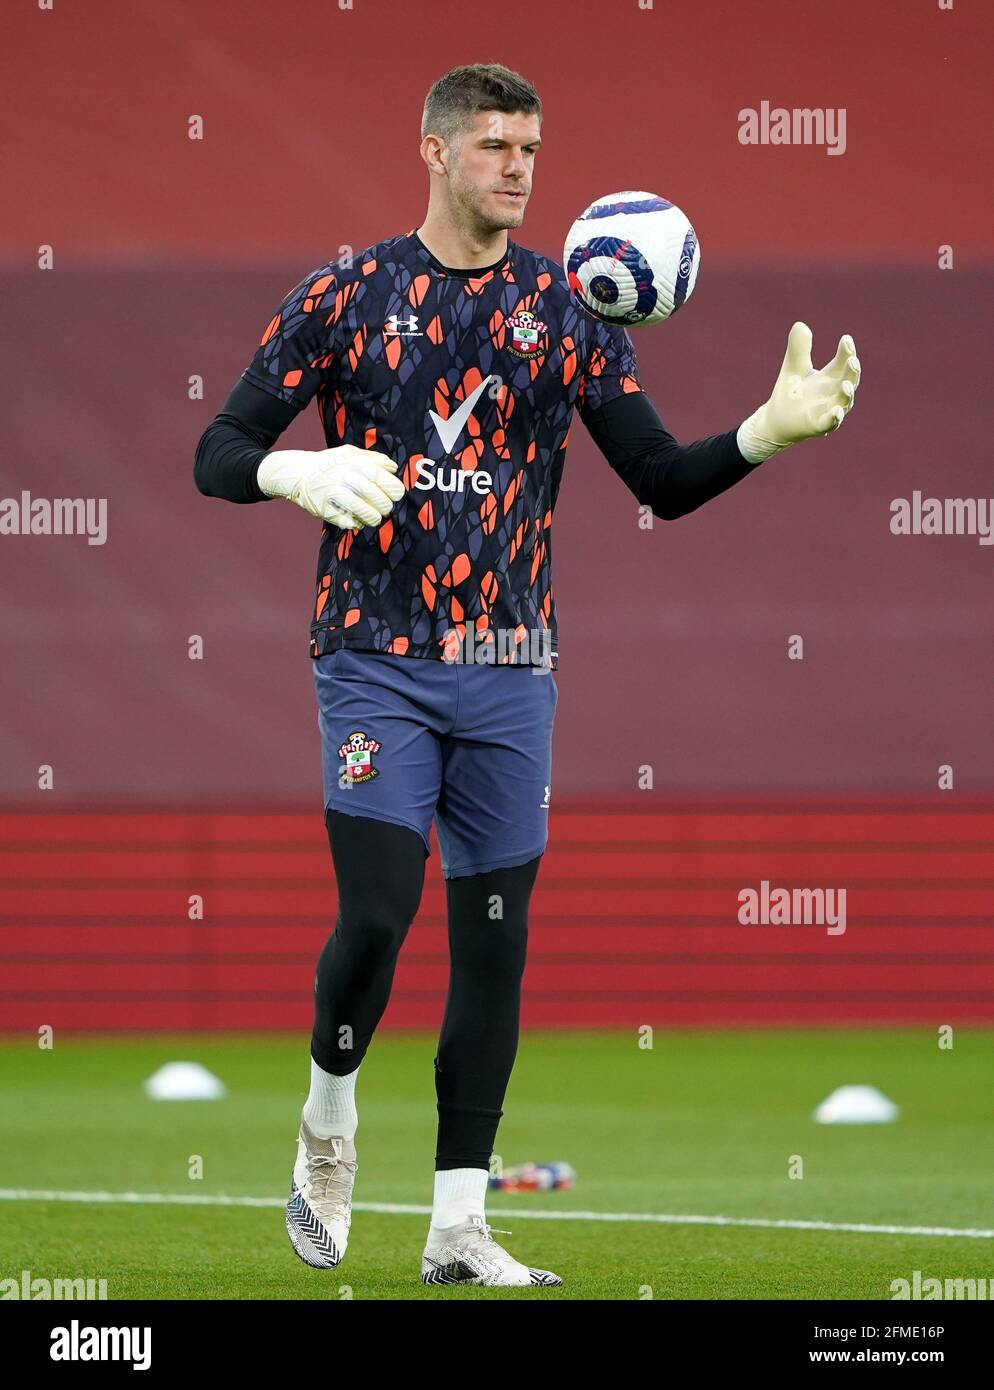 Southampton Goalkeeper Fraser Forster Warming Up Before The Premier League Match At Anfield Liverpool Picture Date Saturday May 8 21 Stock Photo Alamy